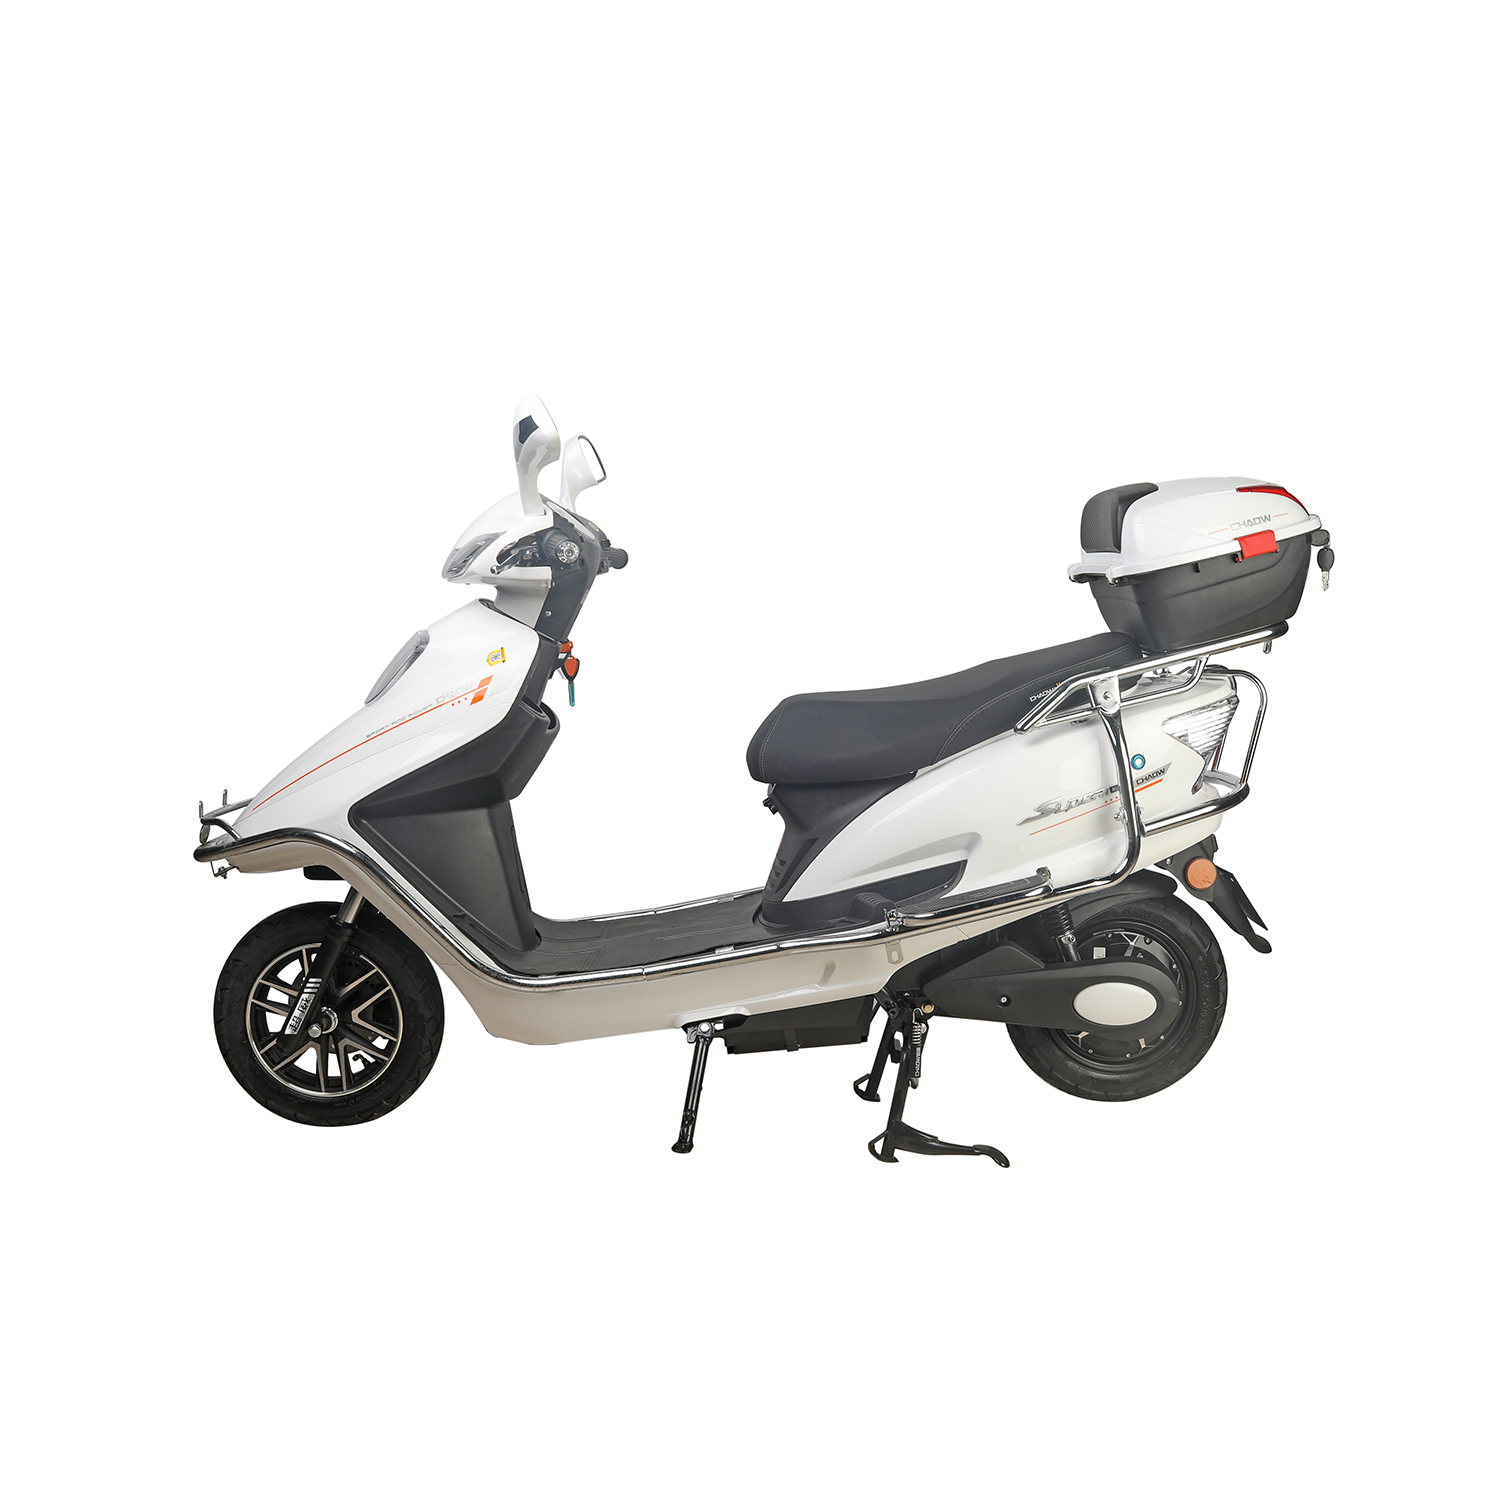 60V/72V BATTERY CAPACITY 1000W TWO -WHEEL ELECTRIC MOTORCYCLE SCOOTER (JS)